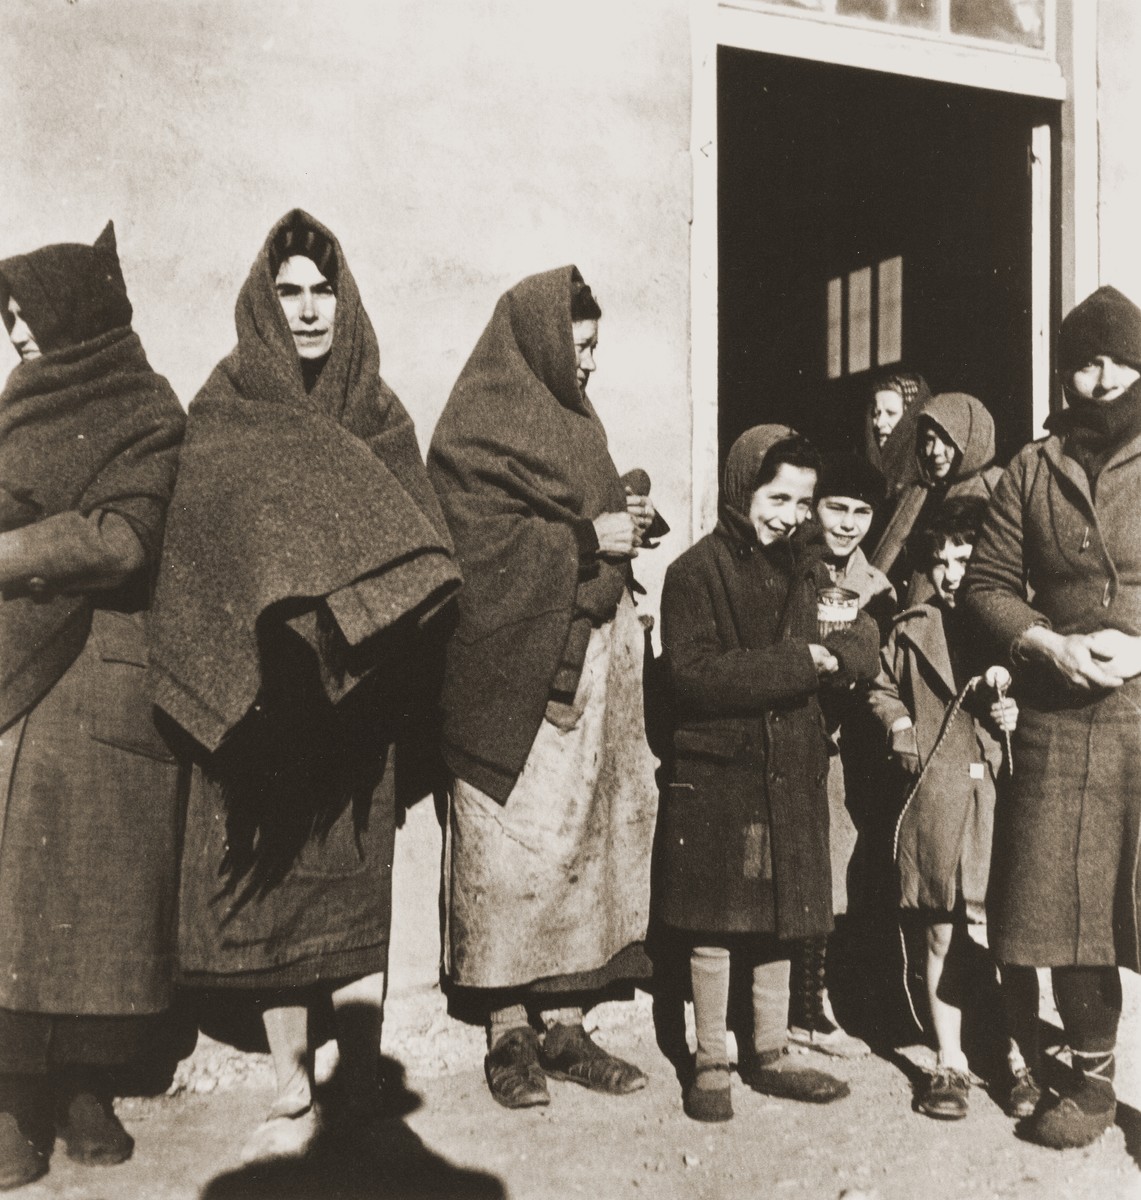 Women and children try to stay warm while waiting for food distribution.